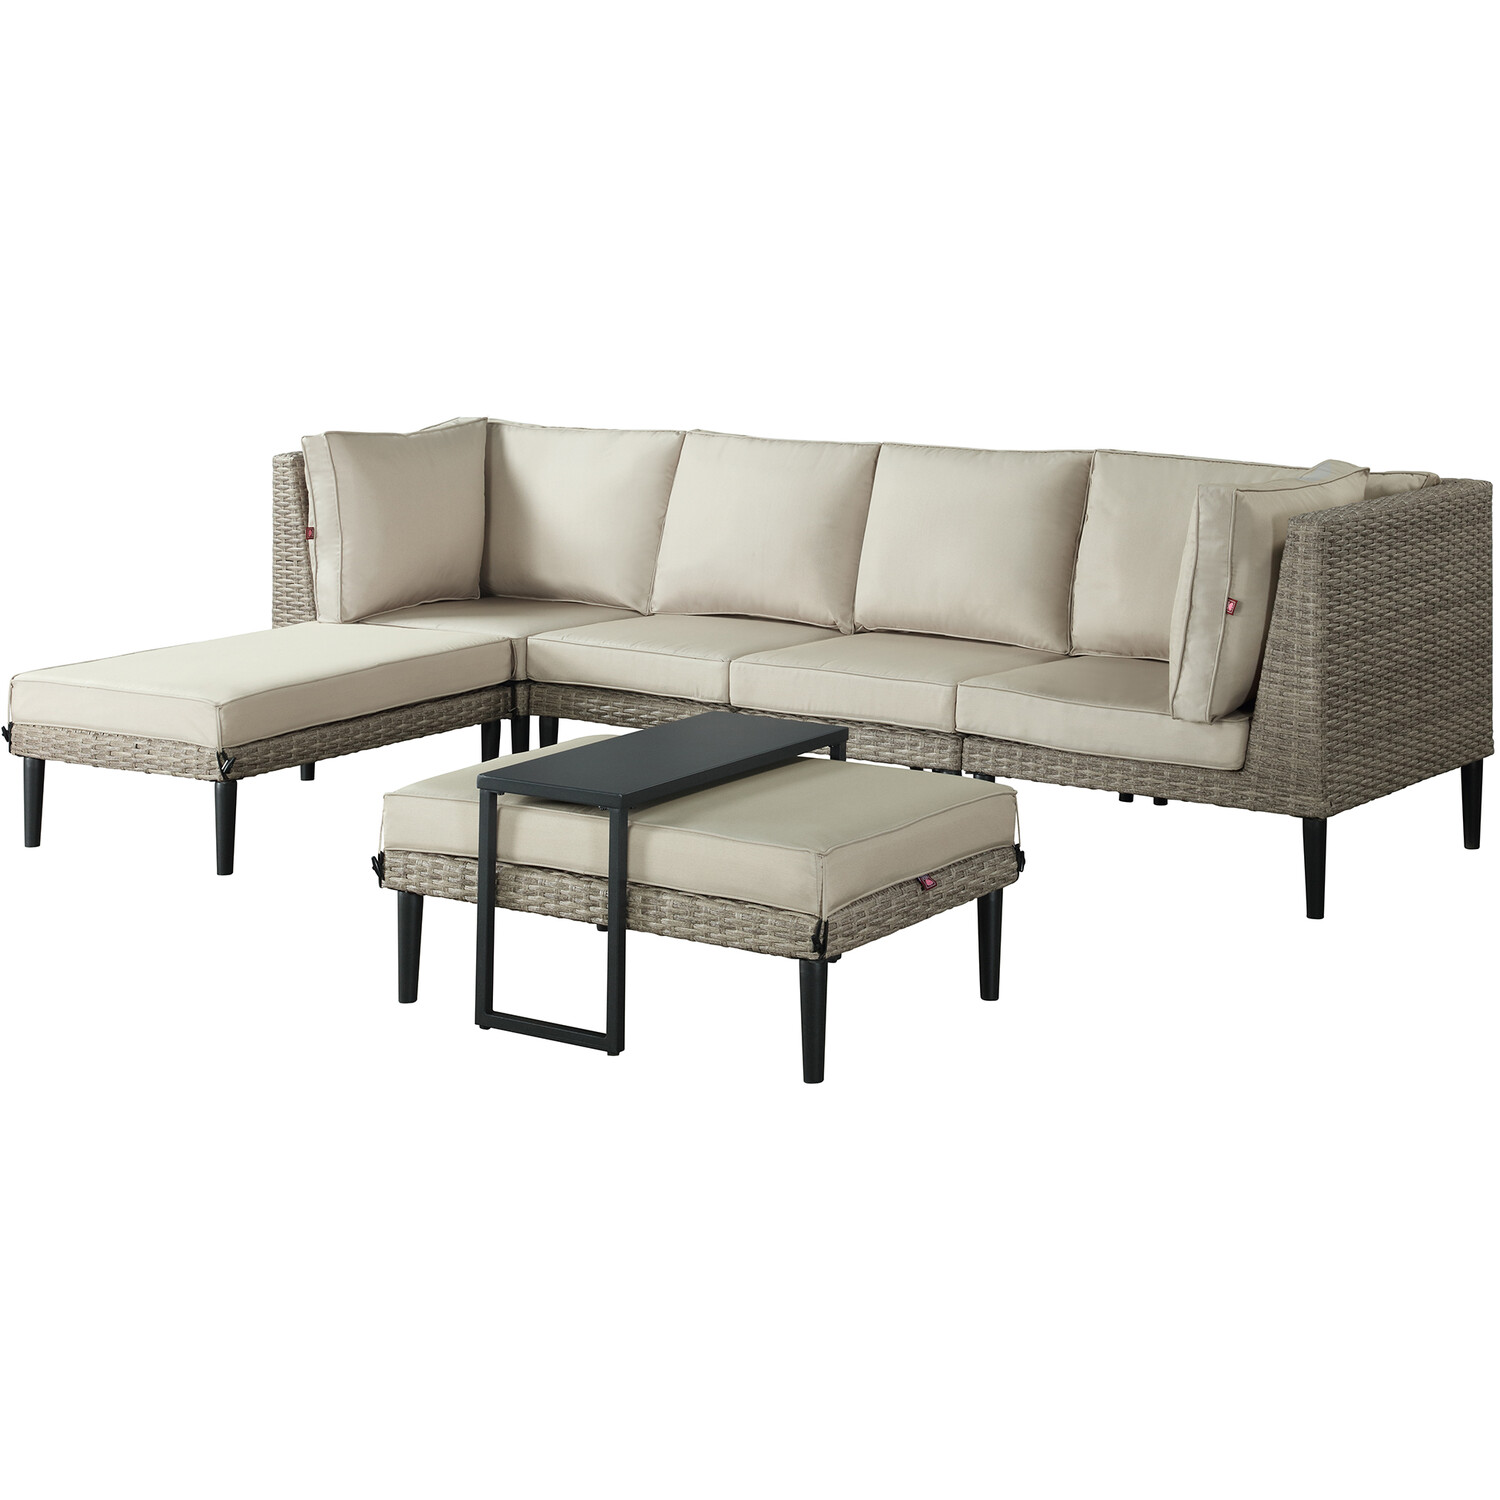 Malay Clydesdale 6 Seater Modular Sectional Corner Lounge Set Image 2